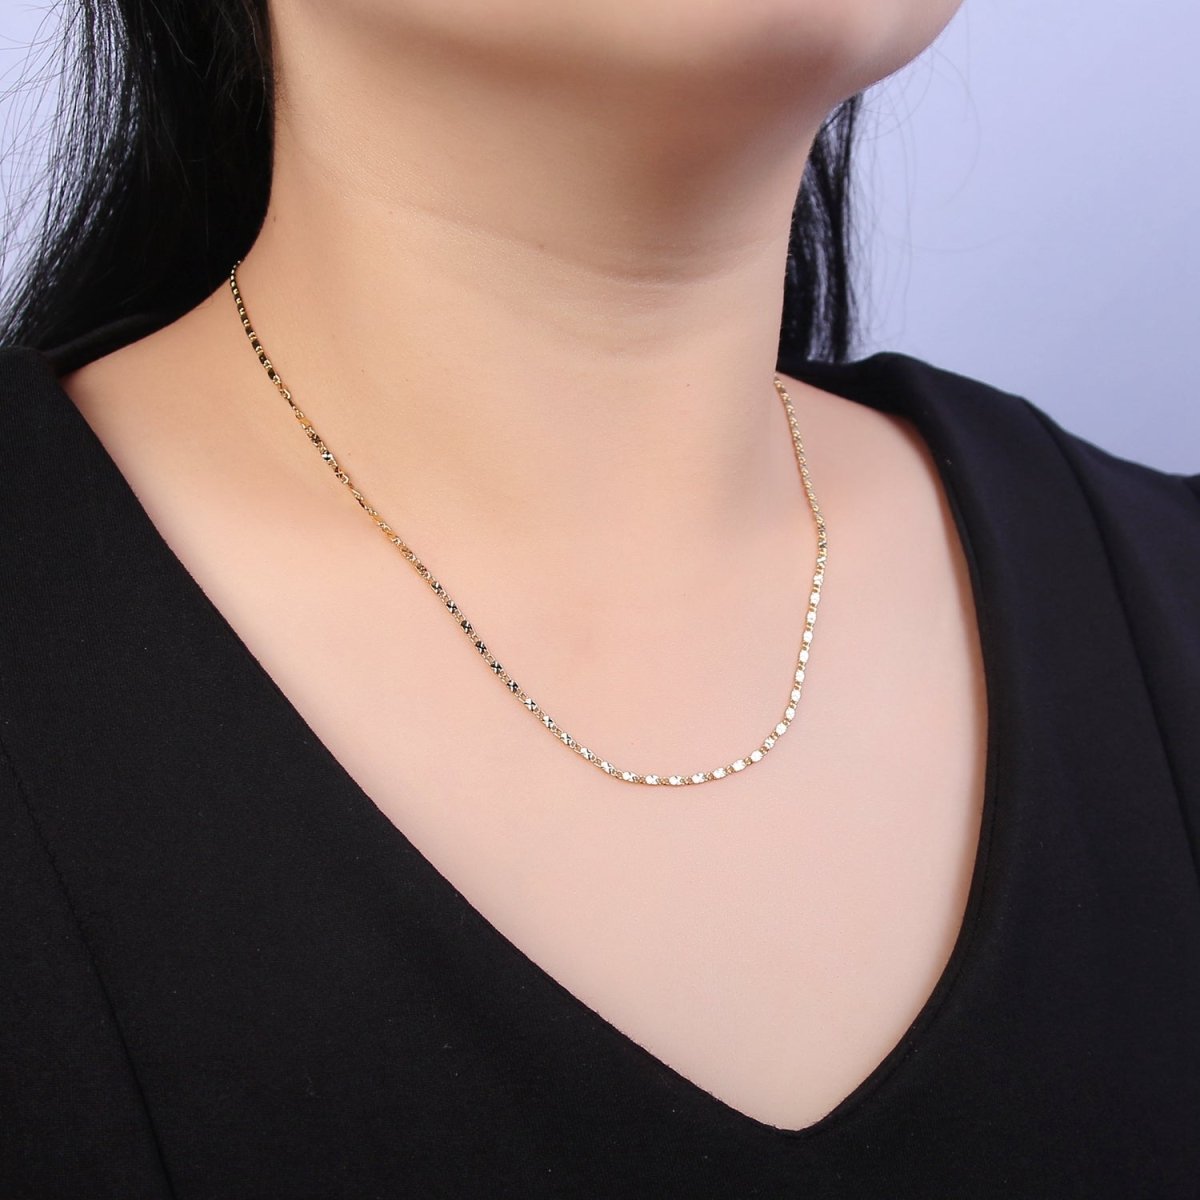 Wholesale Gold Chain Necklace, Fine Scroll Gold Chain, Simple Gold Necklace, Thin Plain Women's Necklace 18" 20" Women Chain | WA-682 WA-683 Clearance Pricing - DLUXCA